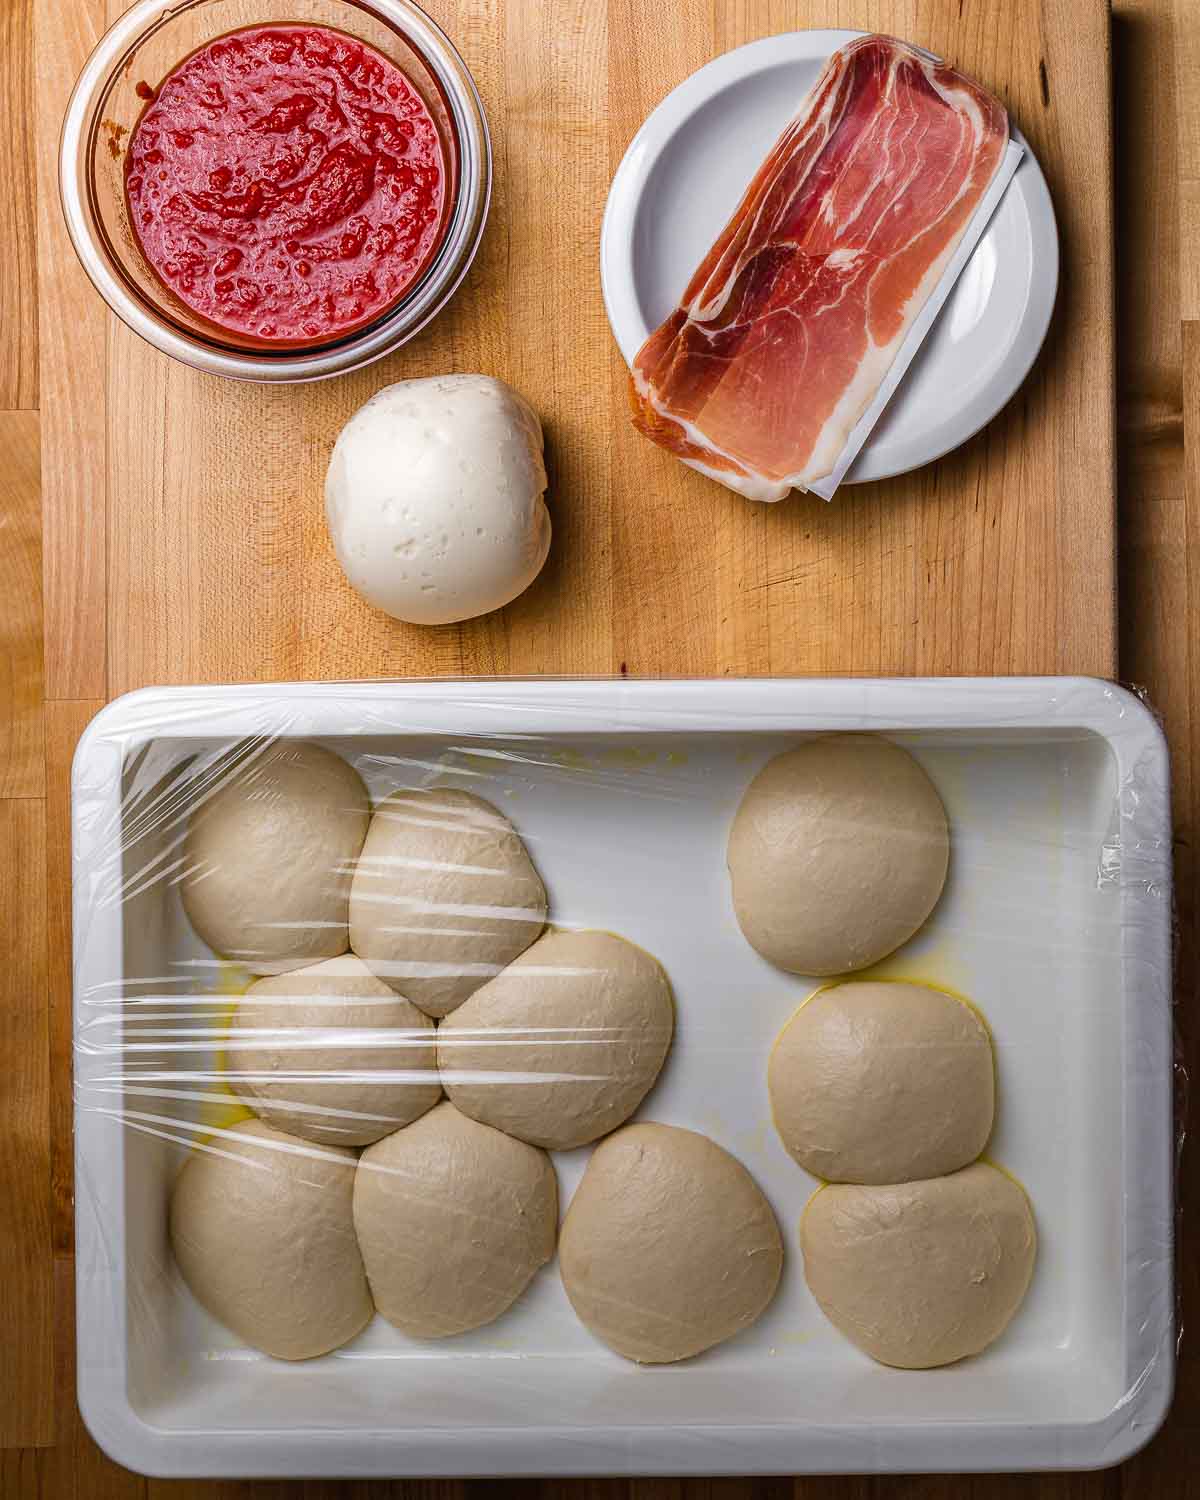 Ingredients shown: crushed tomatoes, fresh mozzarella ball, prosciutto, and 10 small dough balls.